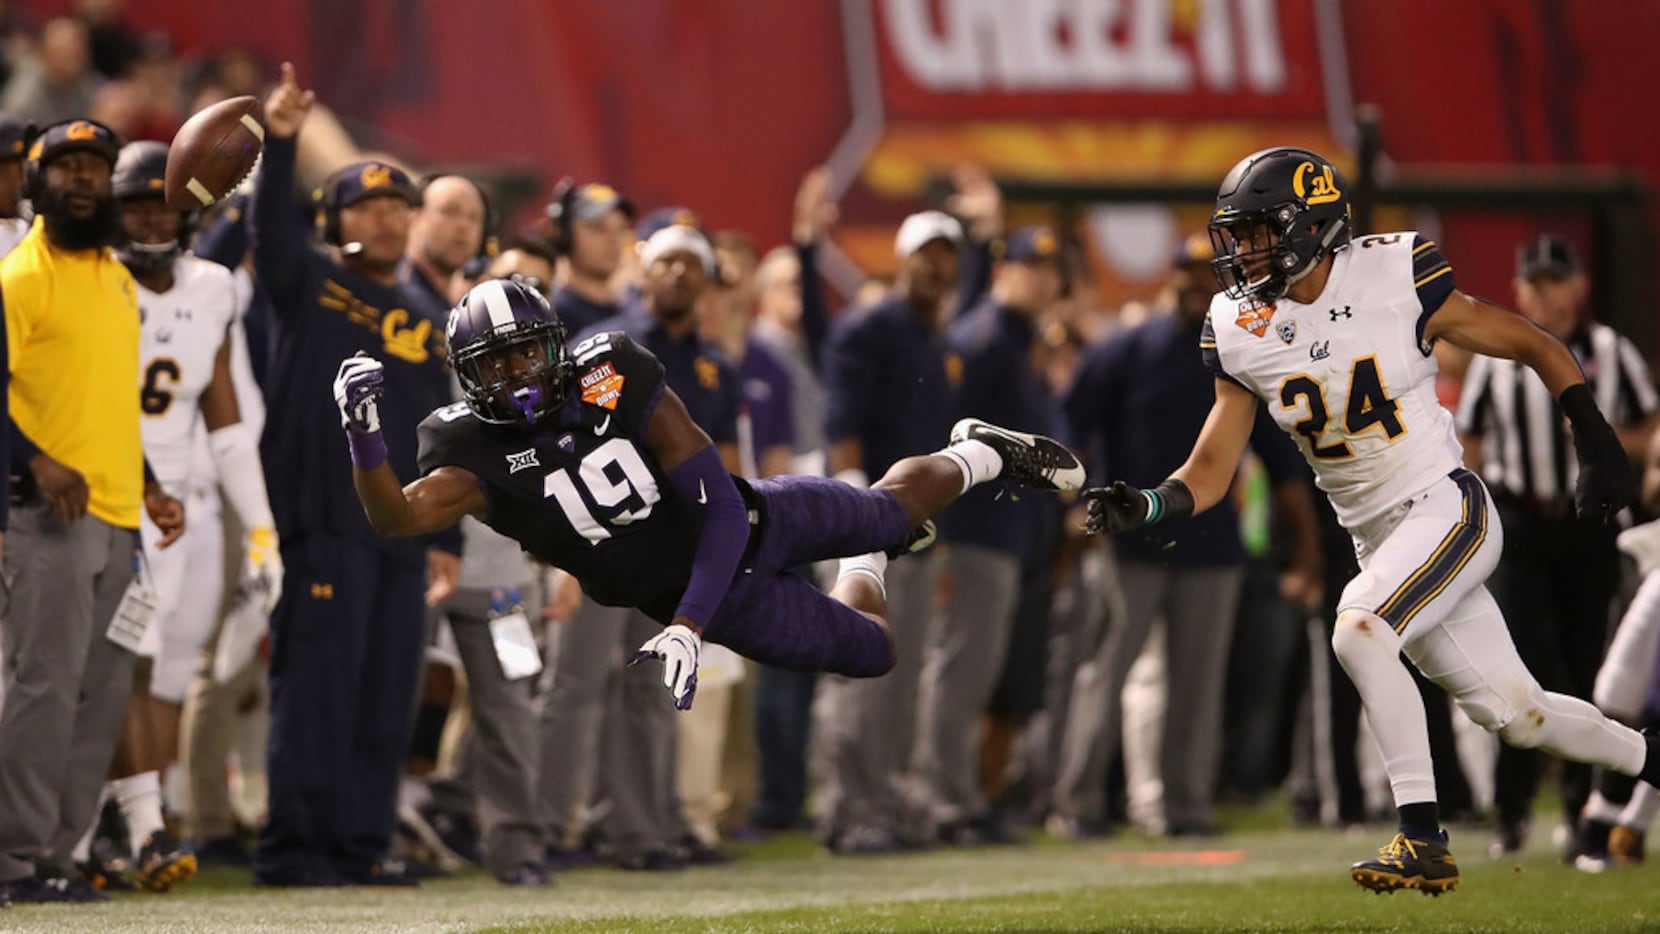 The Cheez-Its were flying': Revisiting TCU's wacky win against Cal